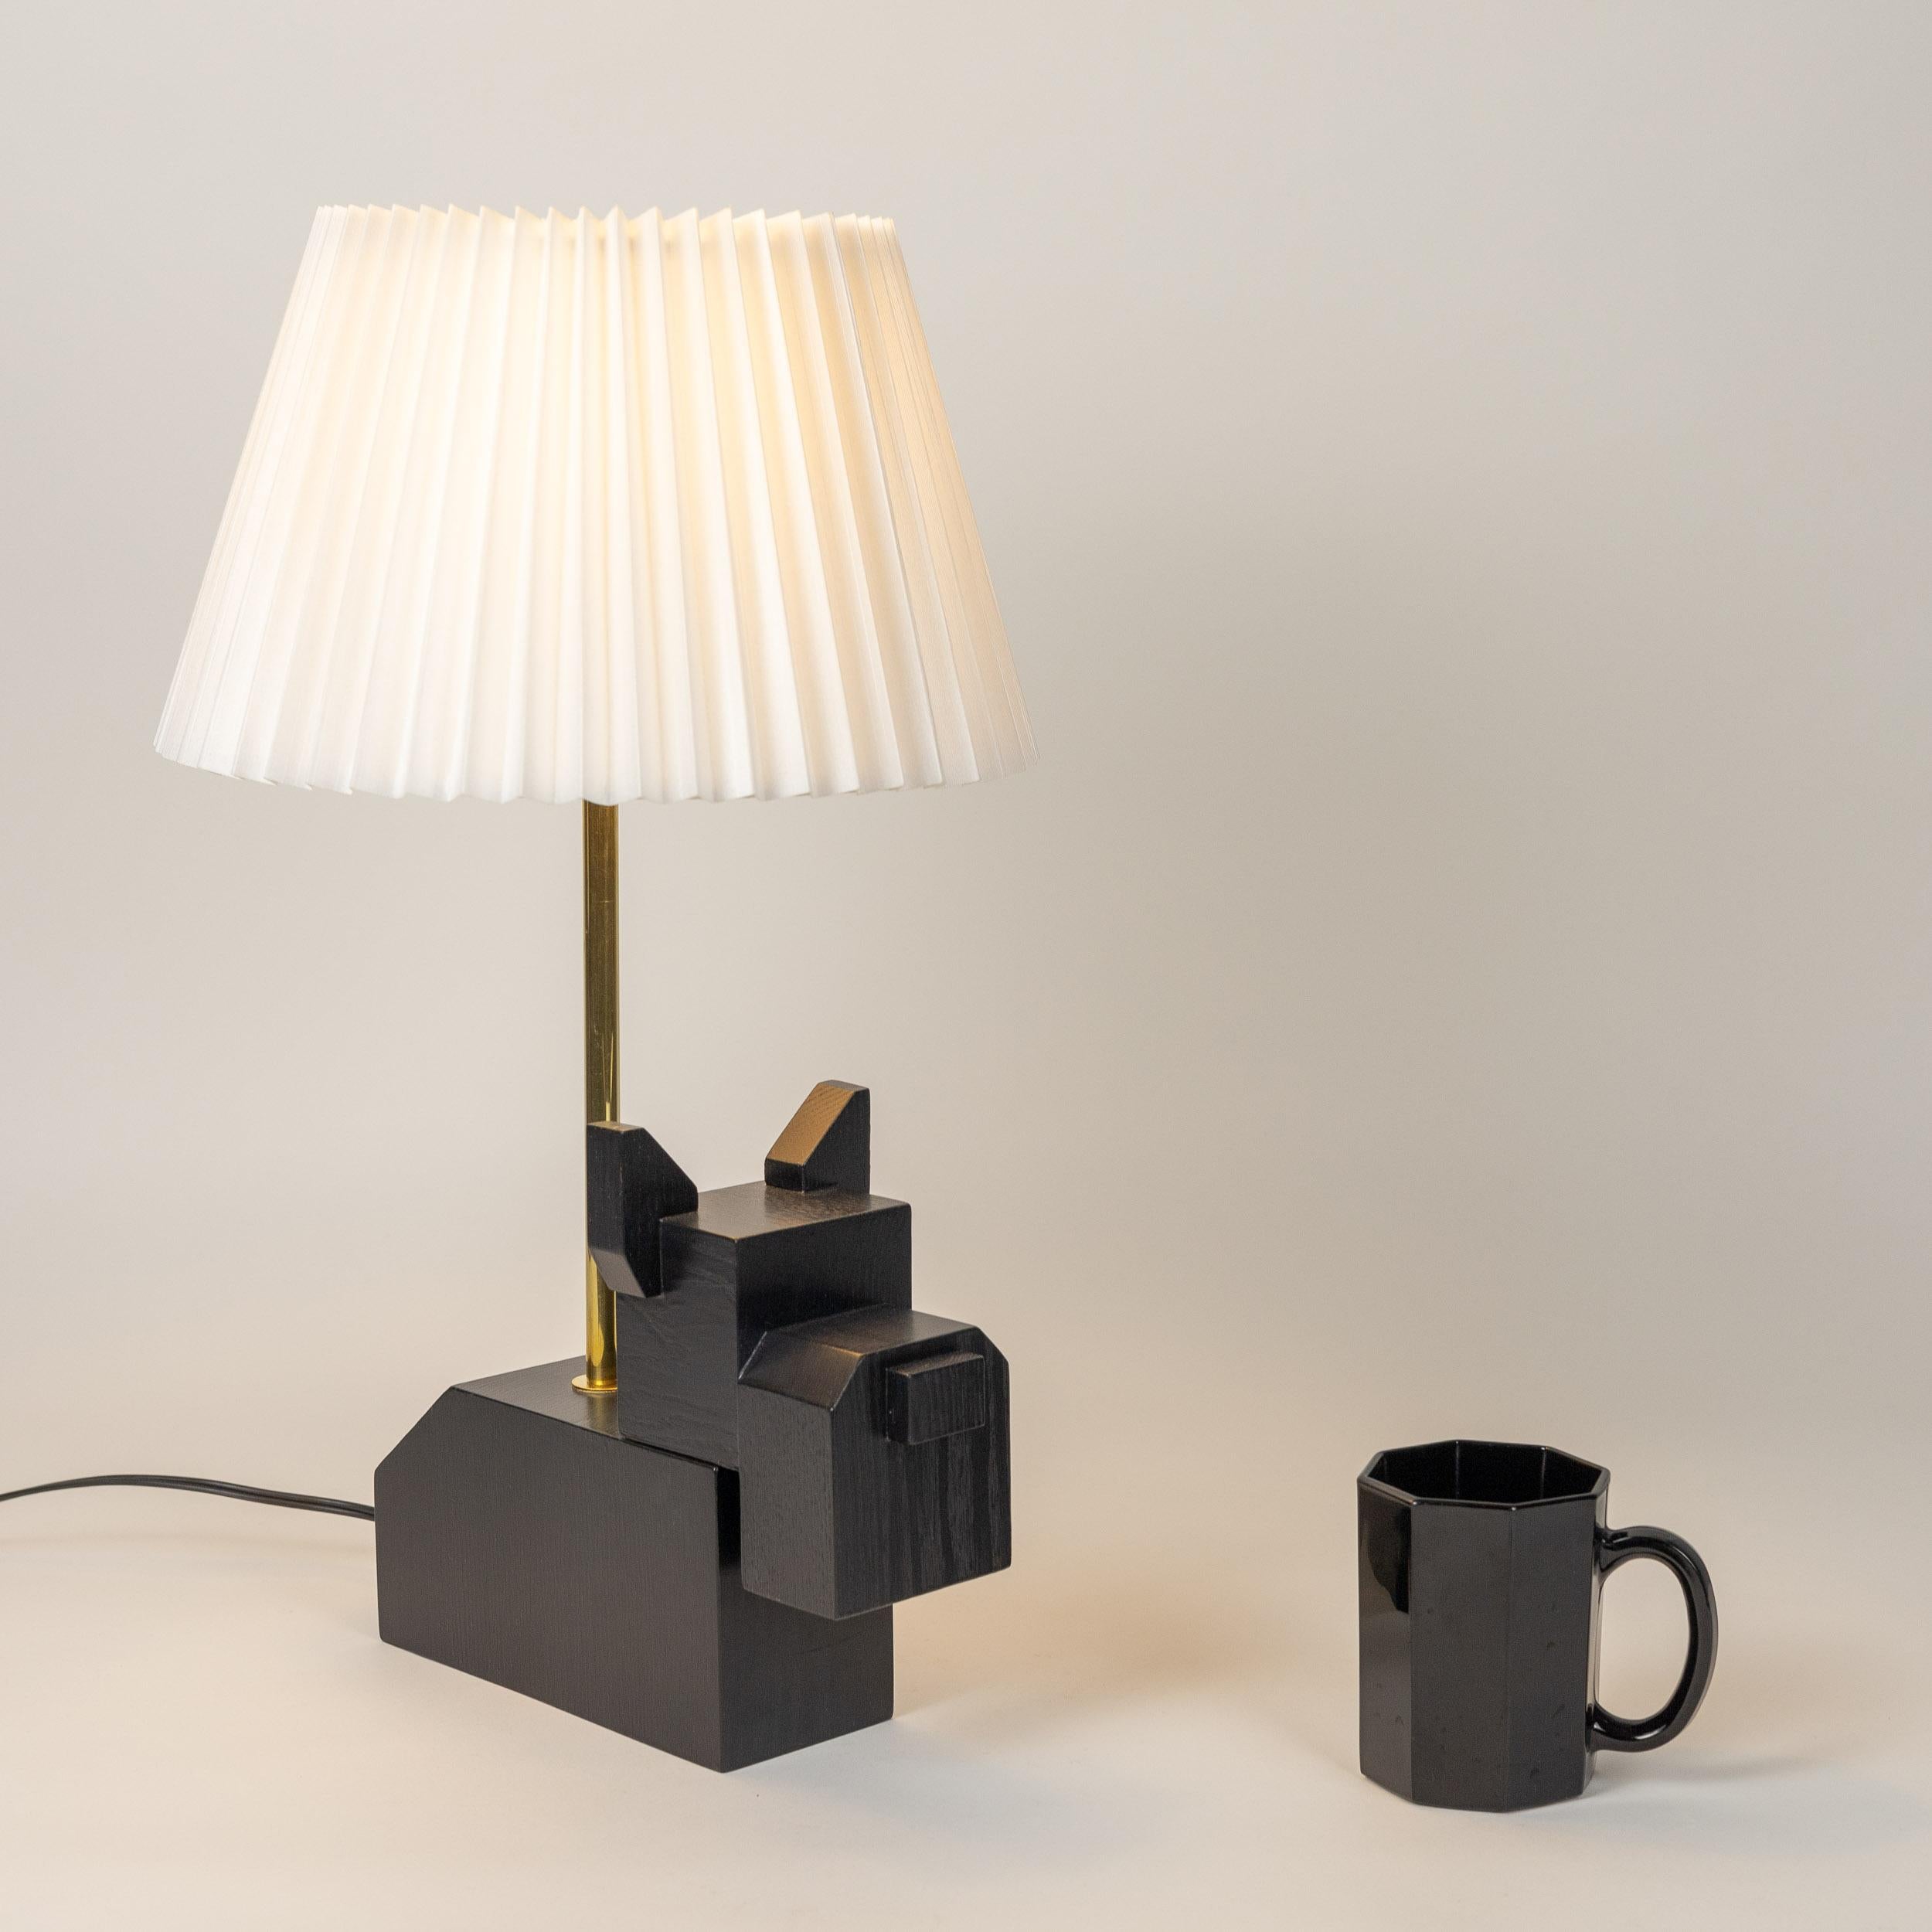 Japanese In-stock, Black Doggy Lamp, Wood Black Table Light with White Pleated Shade, Dog For Sale